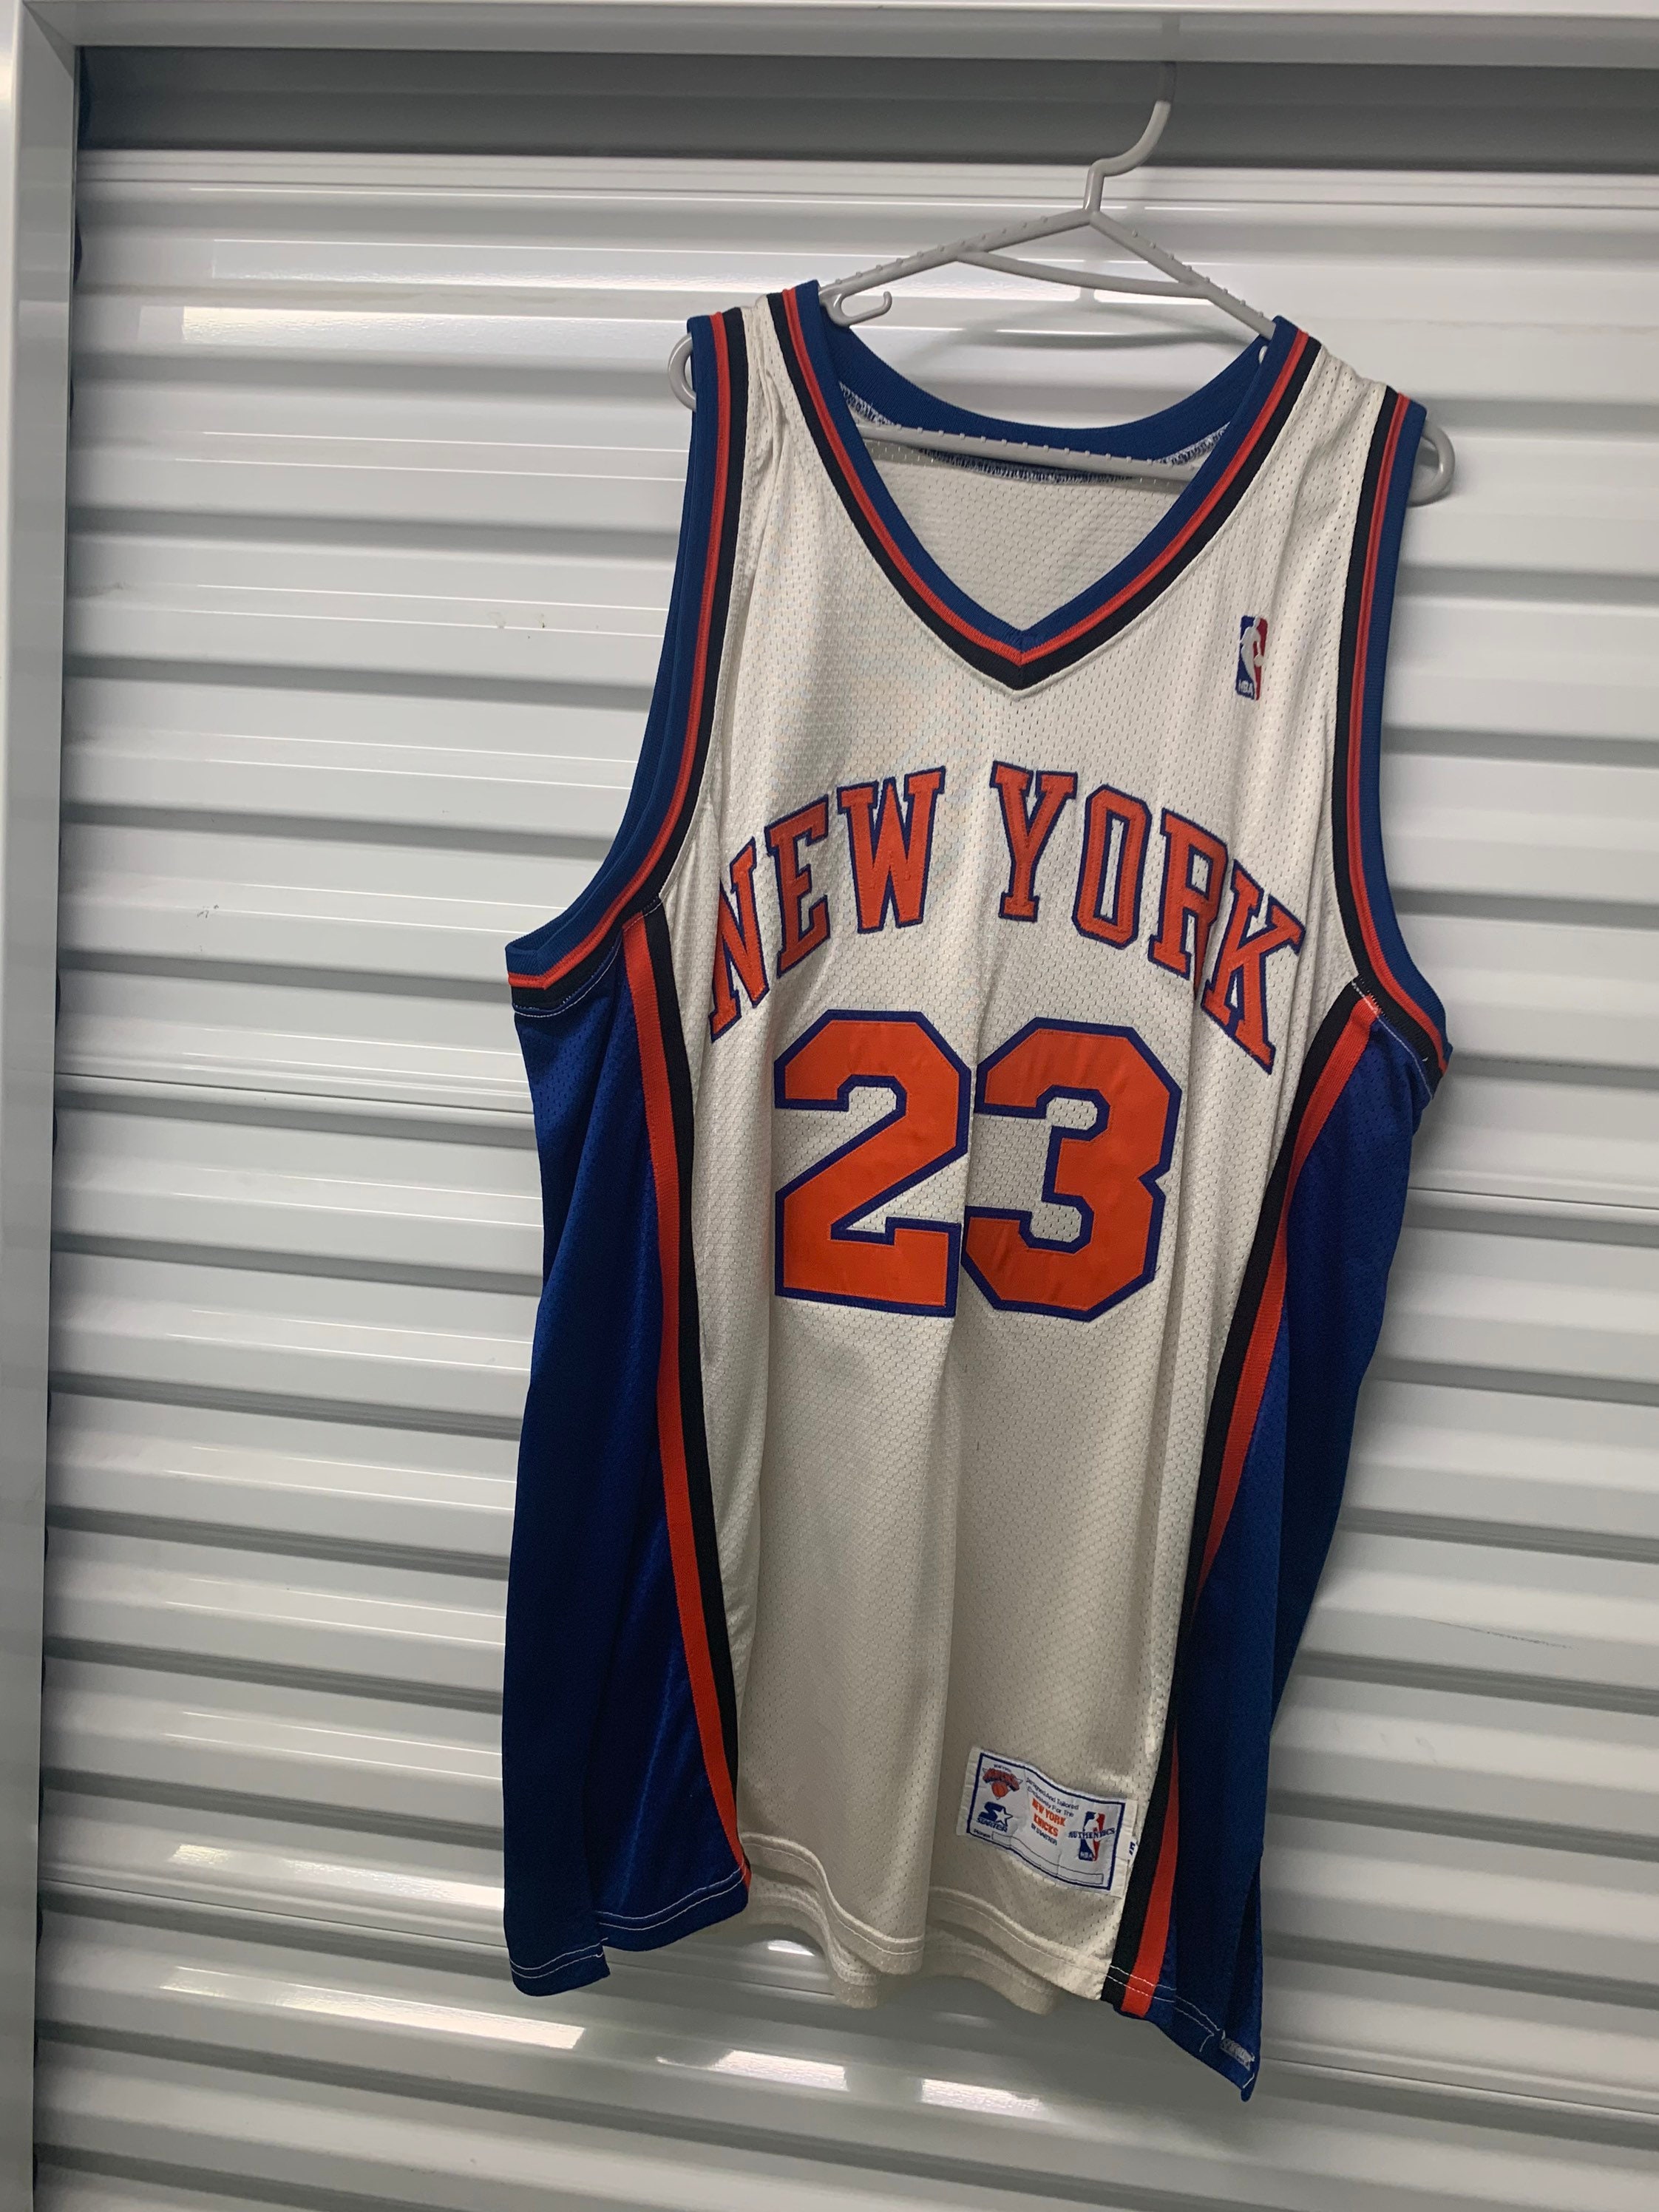 Vintage 90s New York Knicks Authentic Marcus Camby Starter 